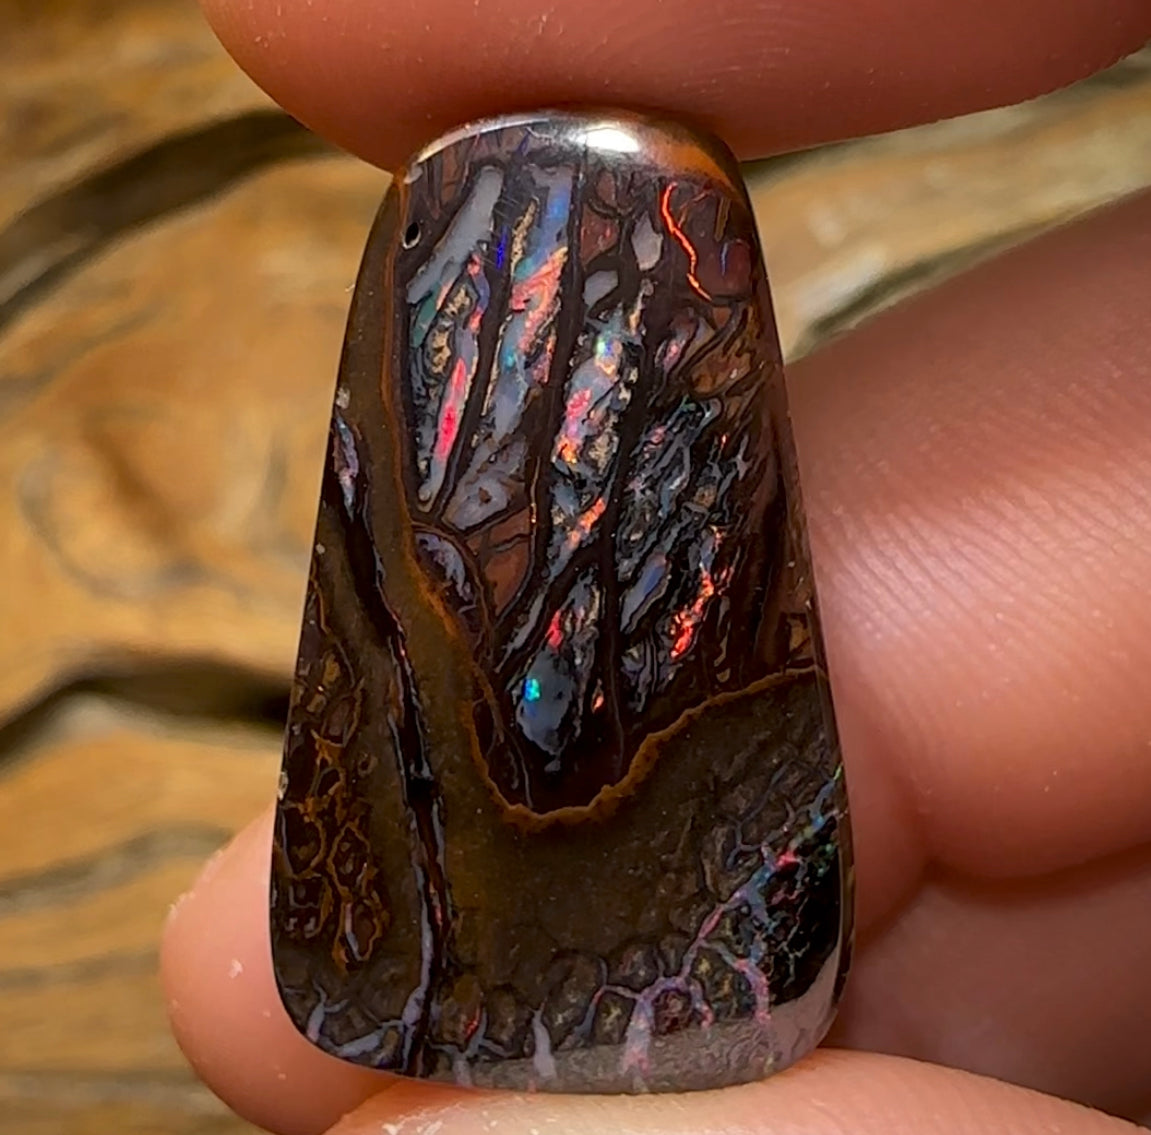 37.4cts - “Red Fire Cathedral” Koroit Queensland Boulder Opal - Opal Whisperers